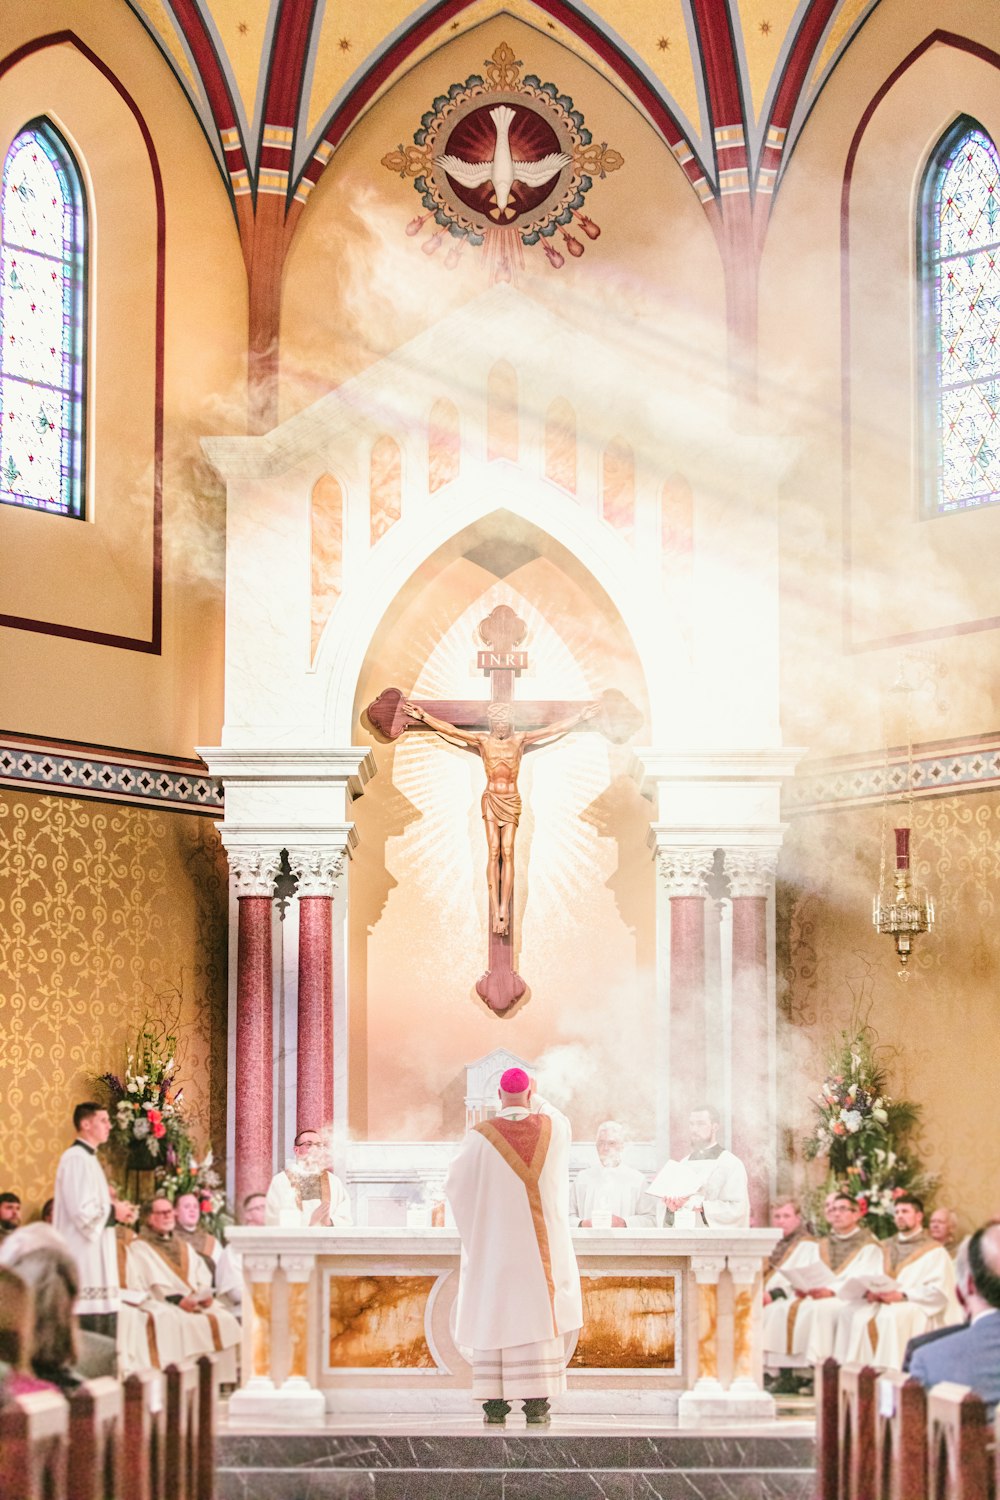 a priest standing at the alter of a church